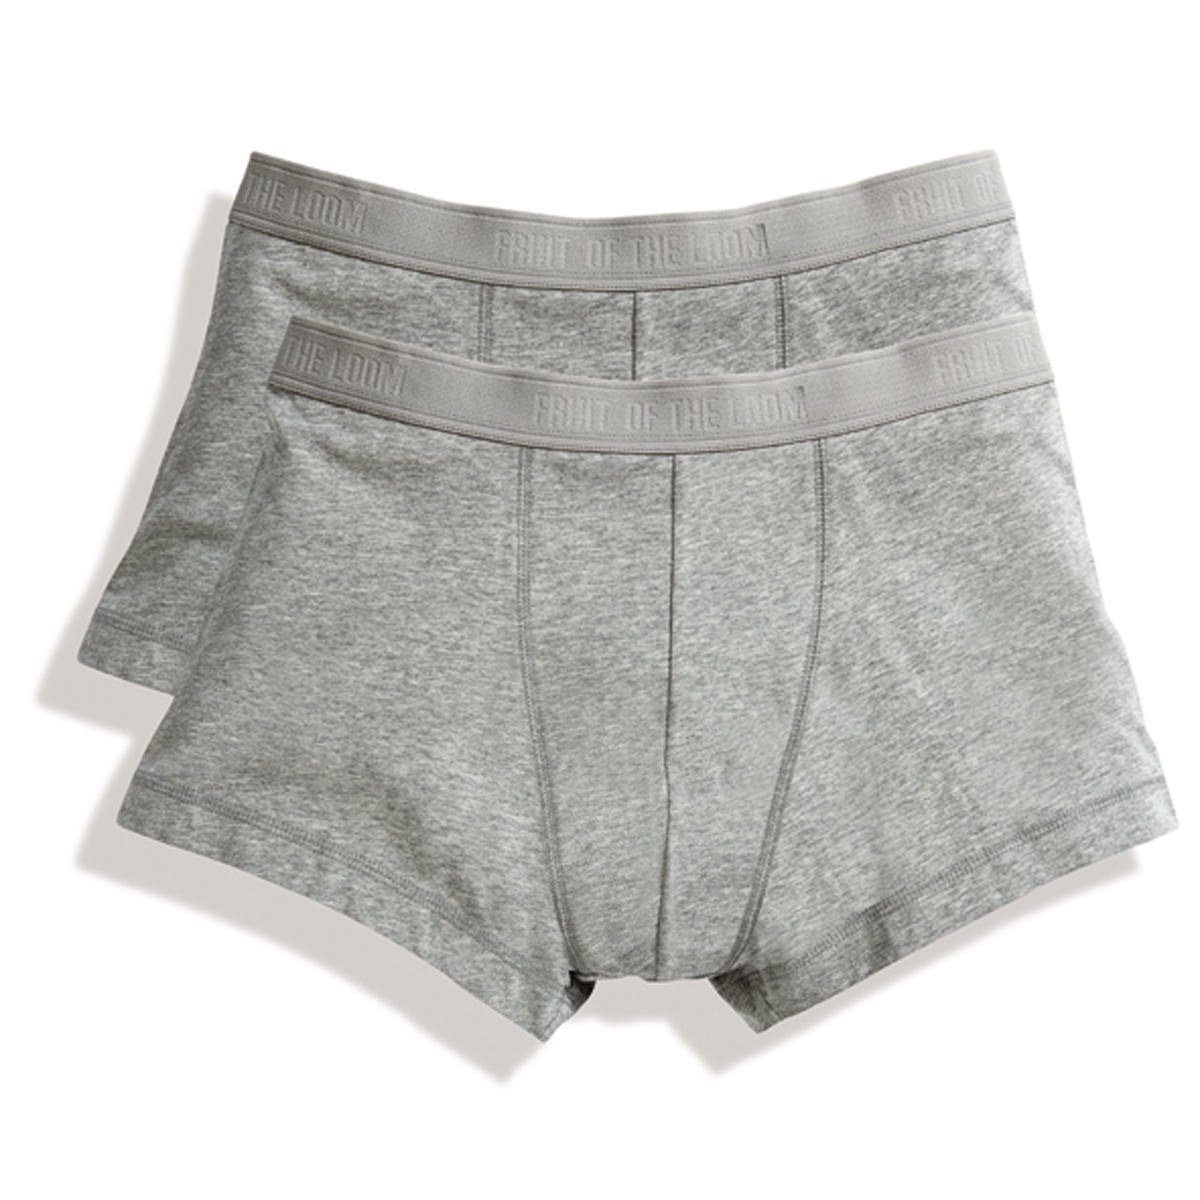 Fruit of the Loom Retro Boxer Fruit of the Loom Classic Shorty, 2er-Pack hellgraumeliert